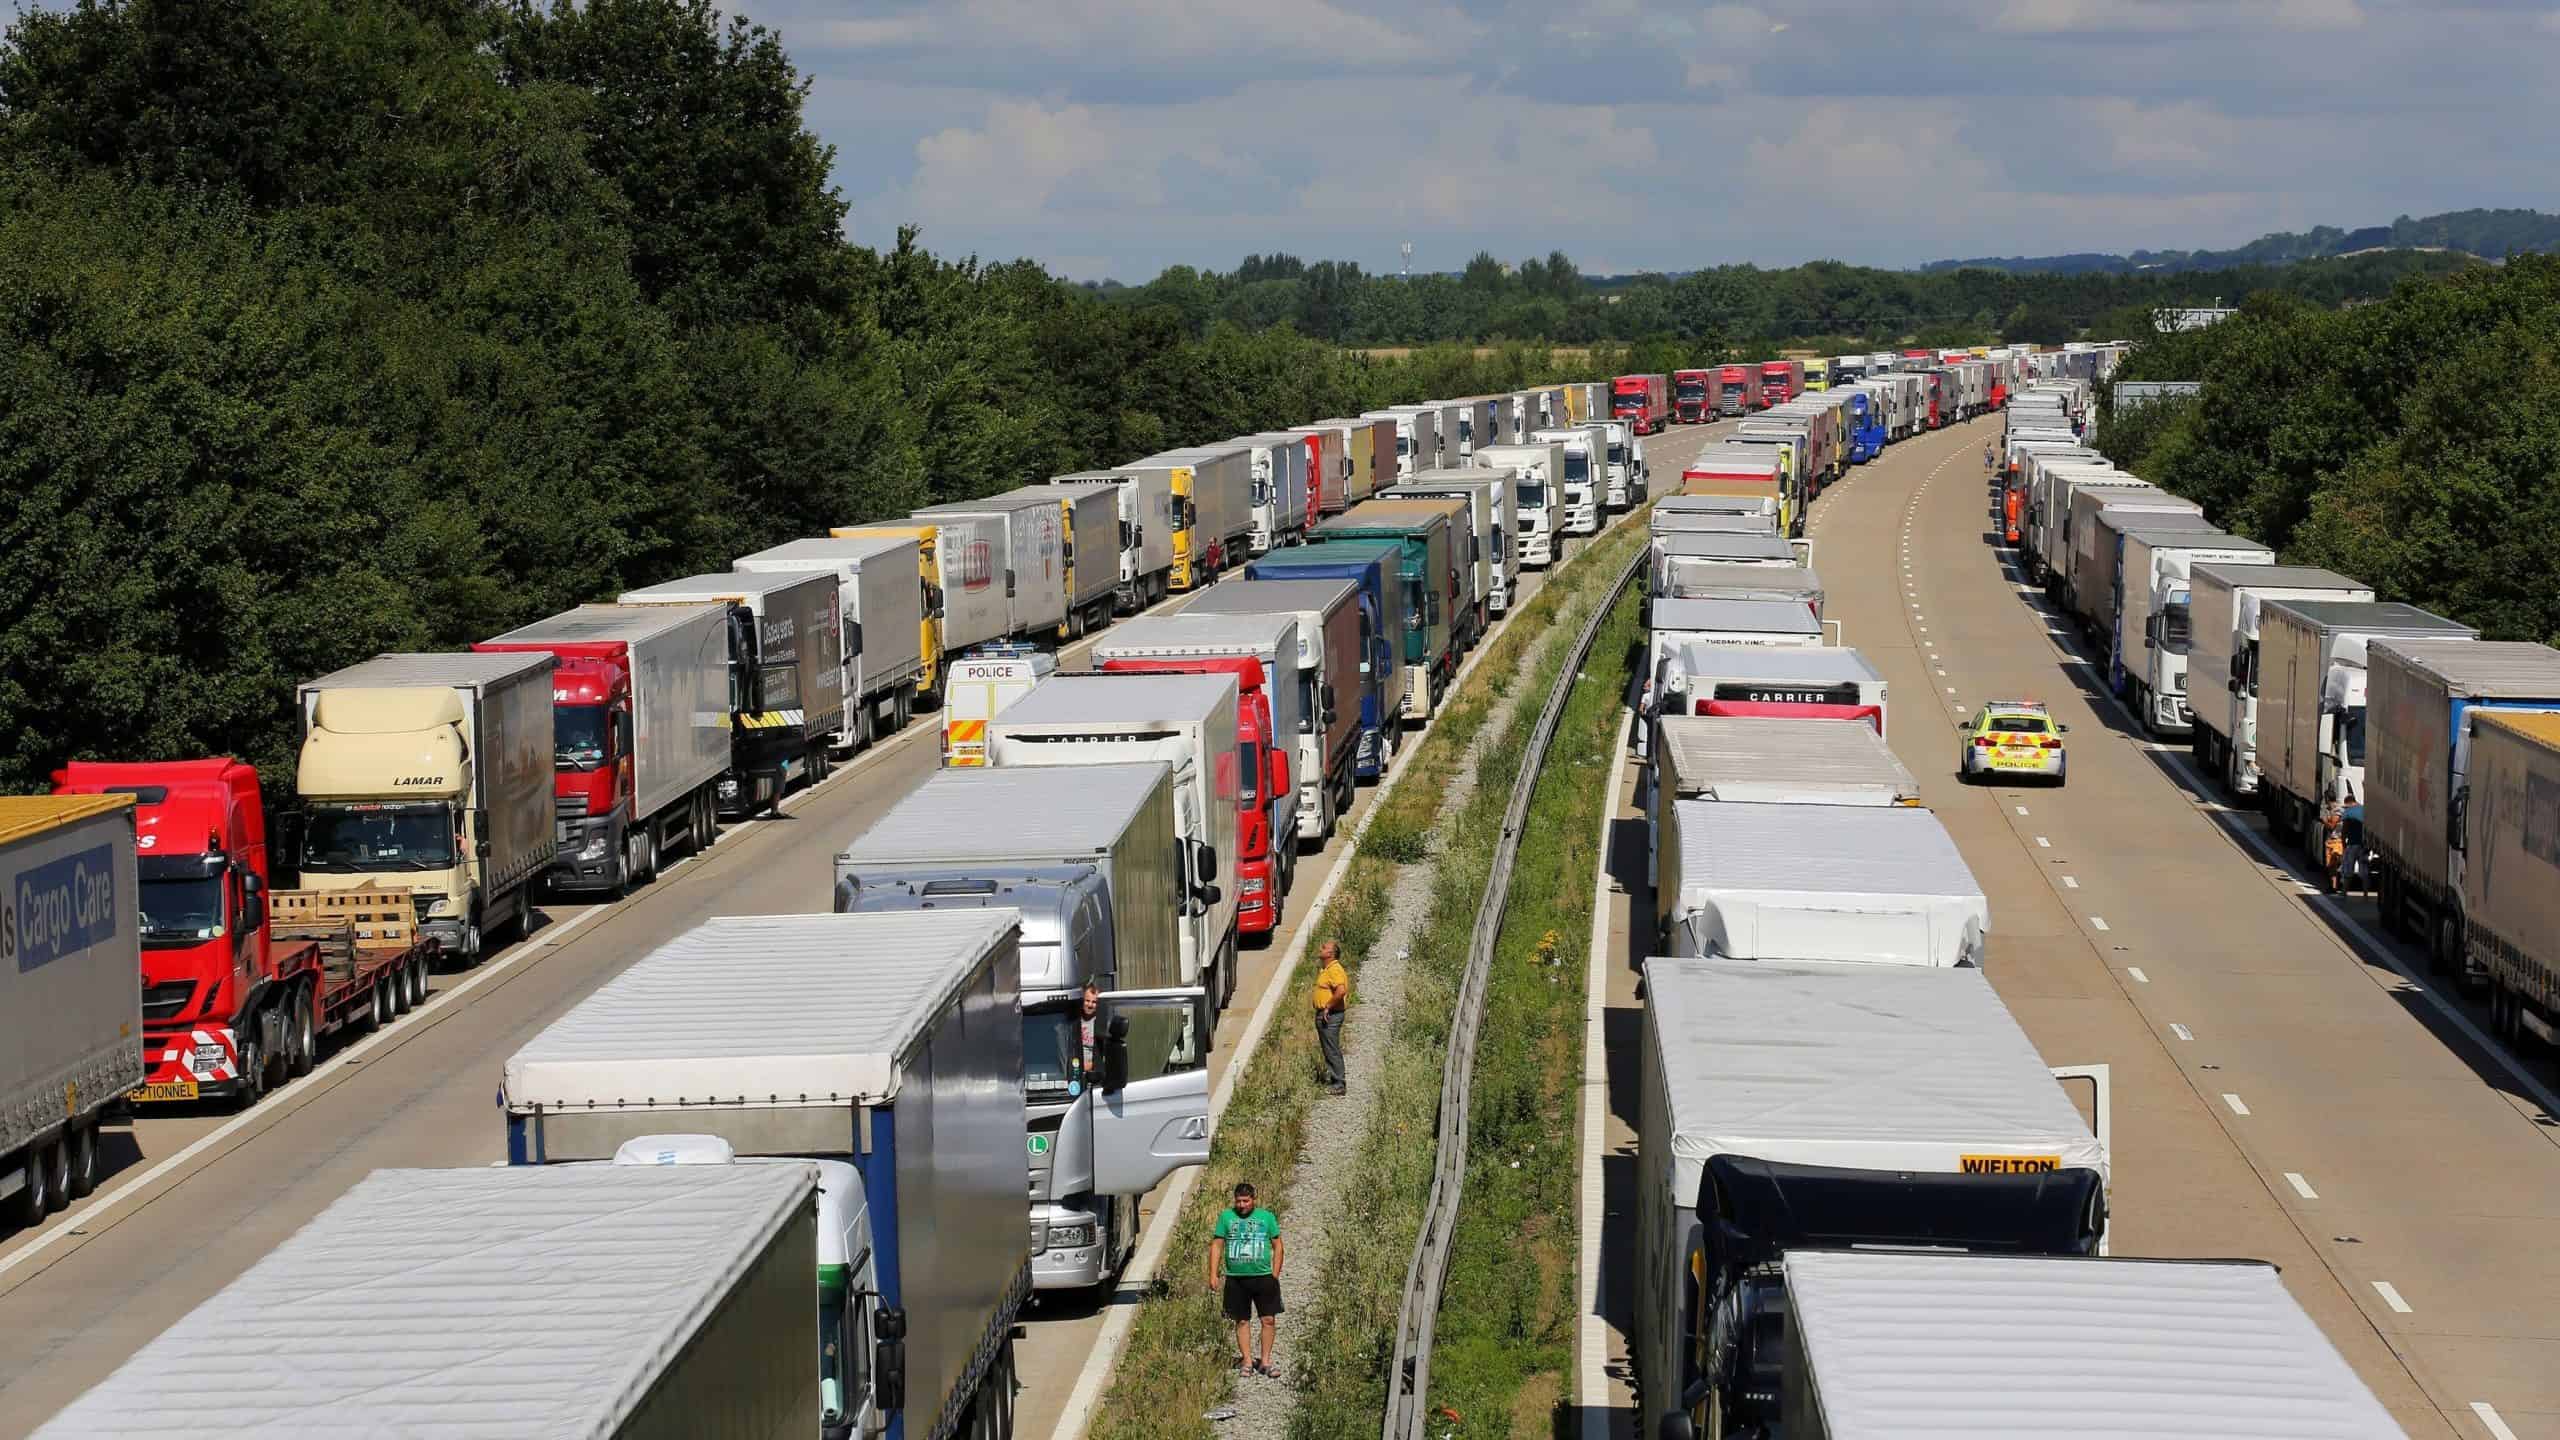 The government’s truck-sized hole in its Brexit border plans